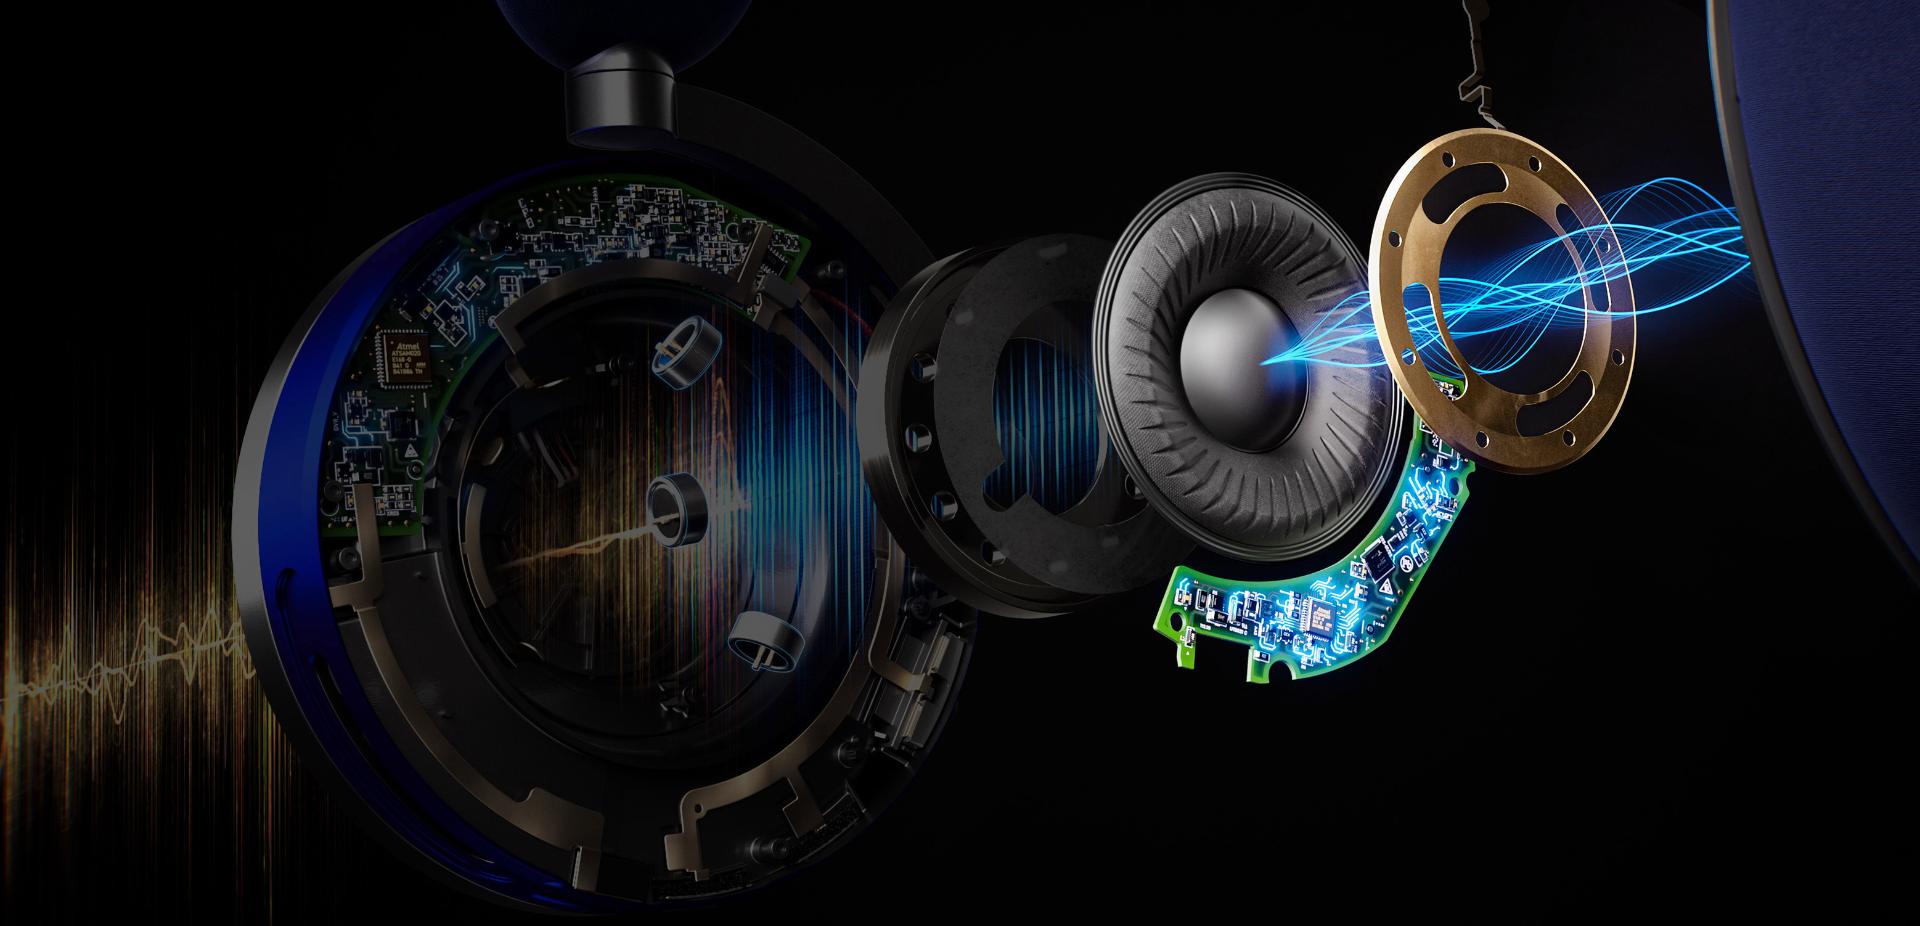 Exploded view shows a representation of different frequency ranges inside the headphones.